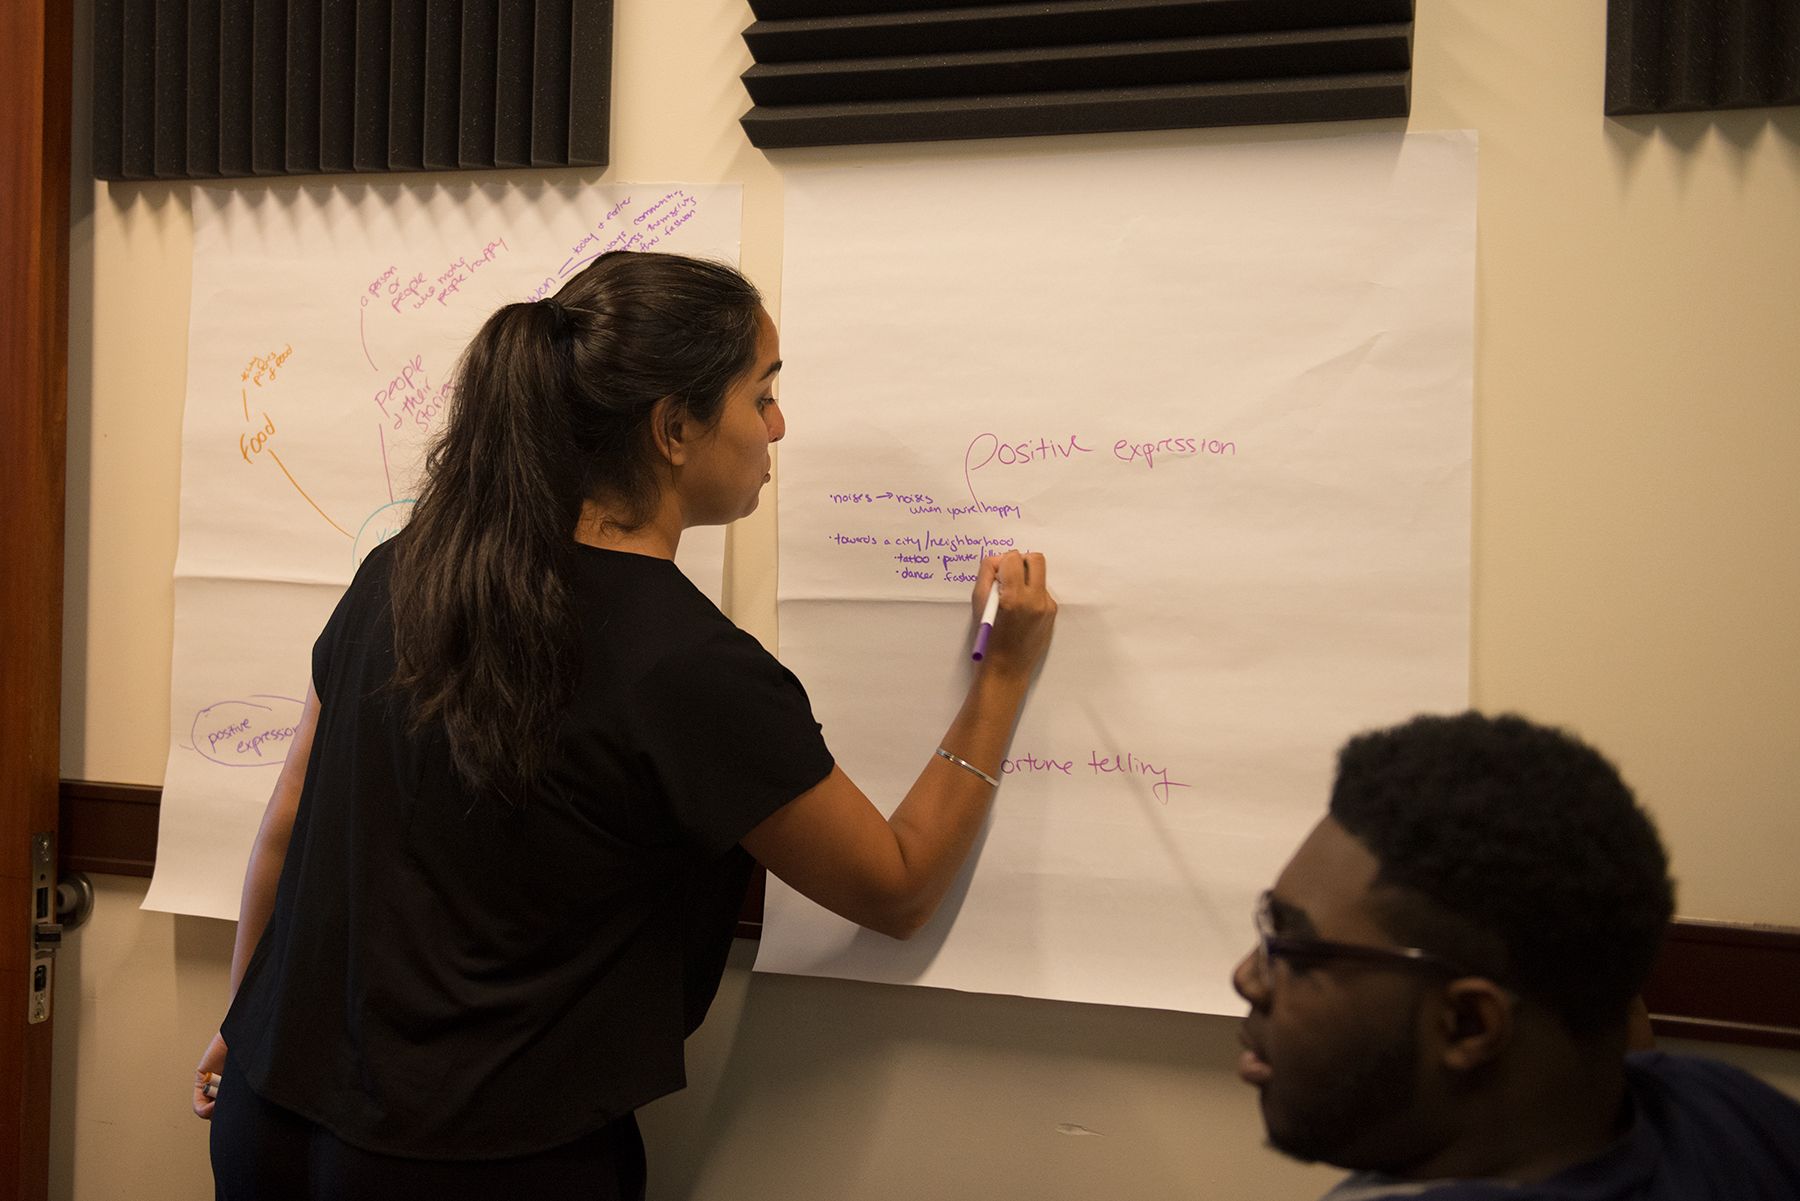 Journalist Meghan Dhaliwal writes down her group's ideas as they discuss them. Throughout the six-week program, the journalists will act as mentors to the students and check in each week. Image by Jordan Roth. United States, 2017.